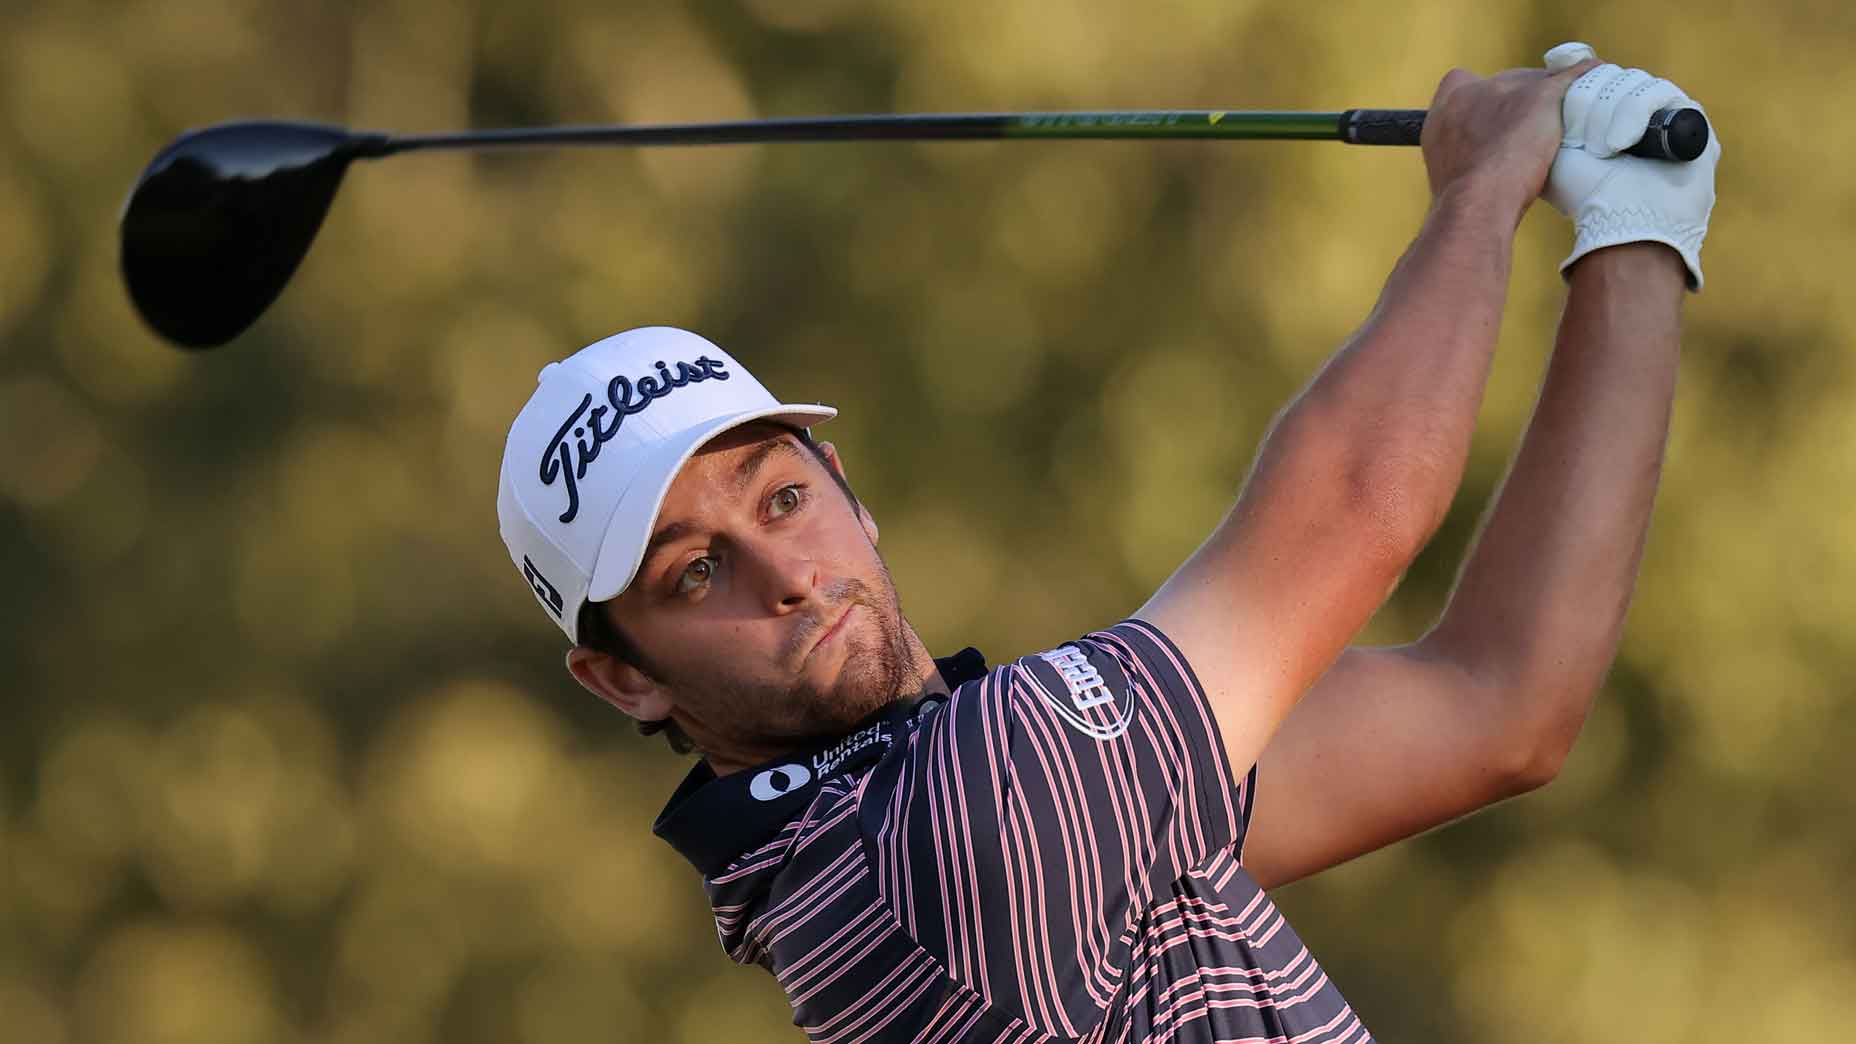 Chip Vibrere distrikt Sanderson Farms Championship leaderboard: Who's leading after Round 1